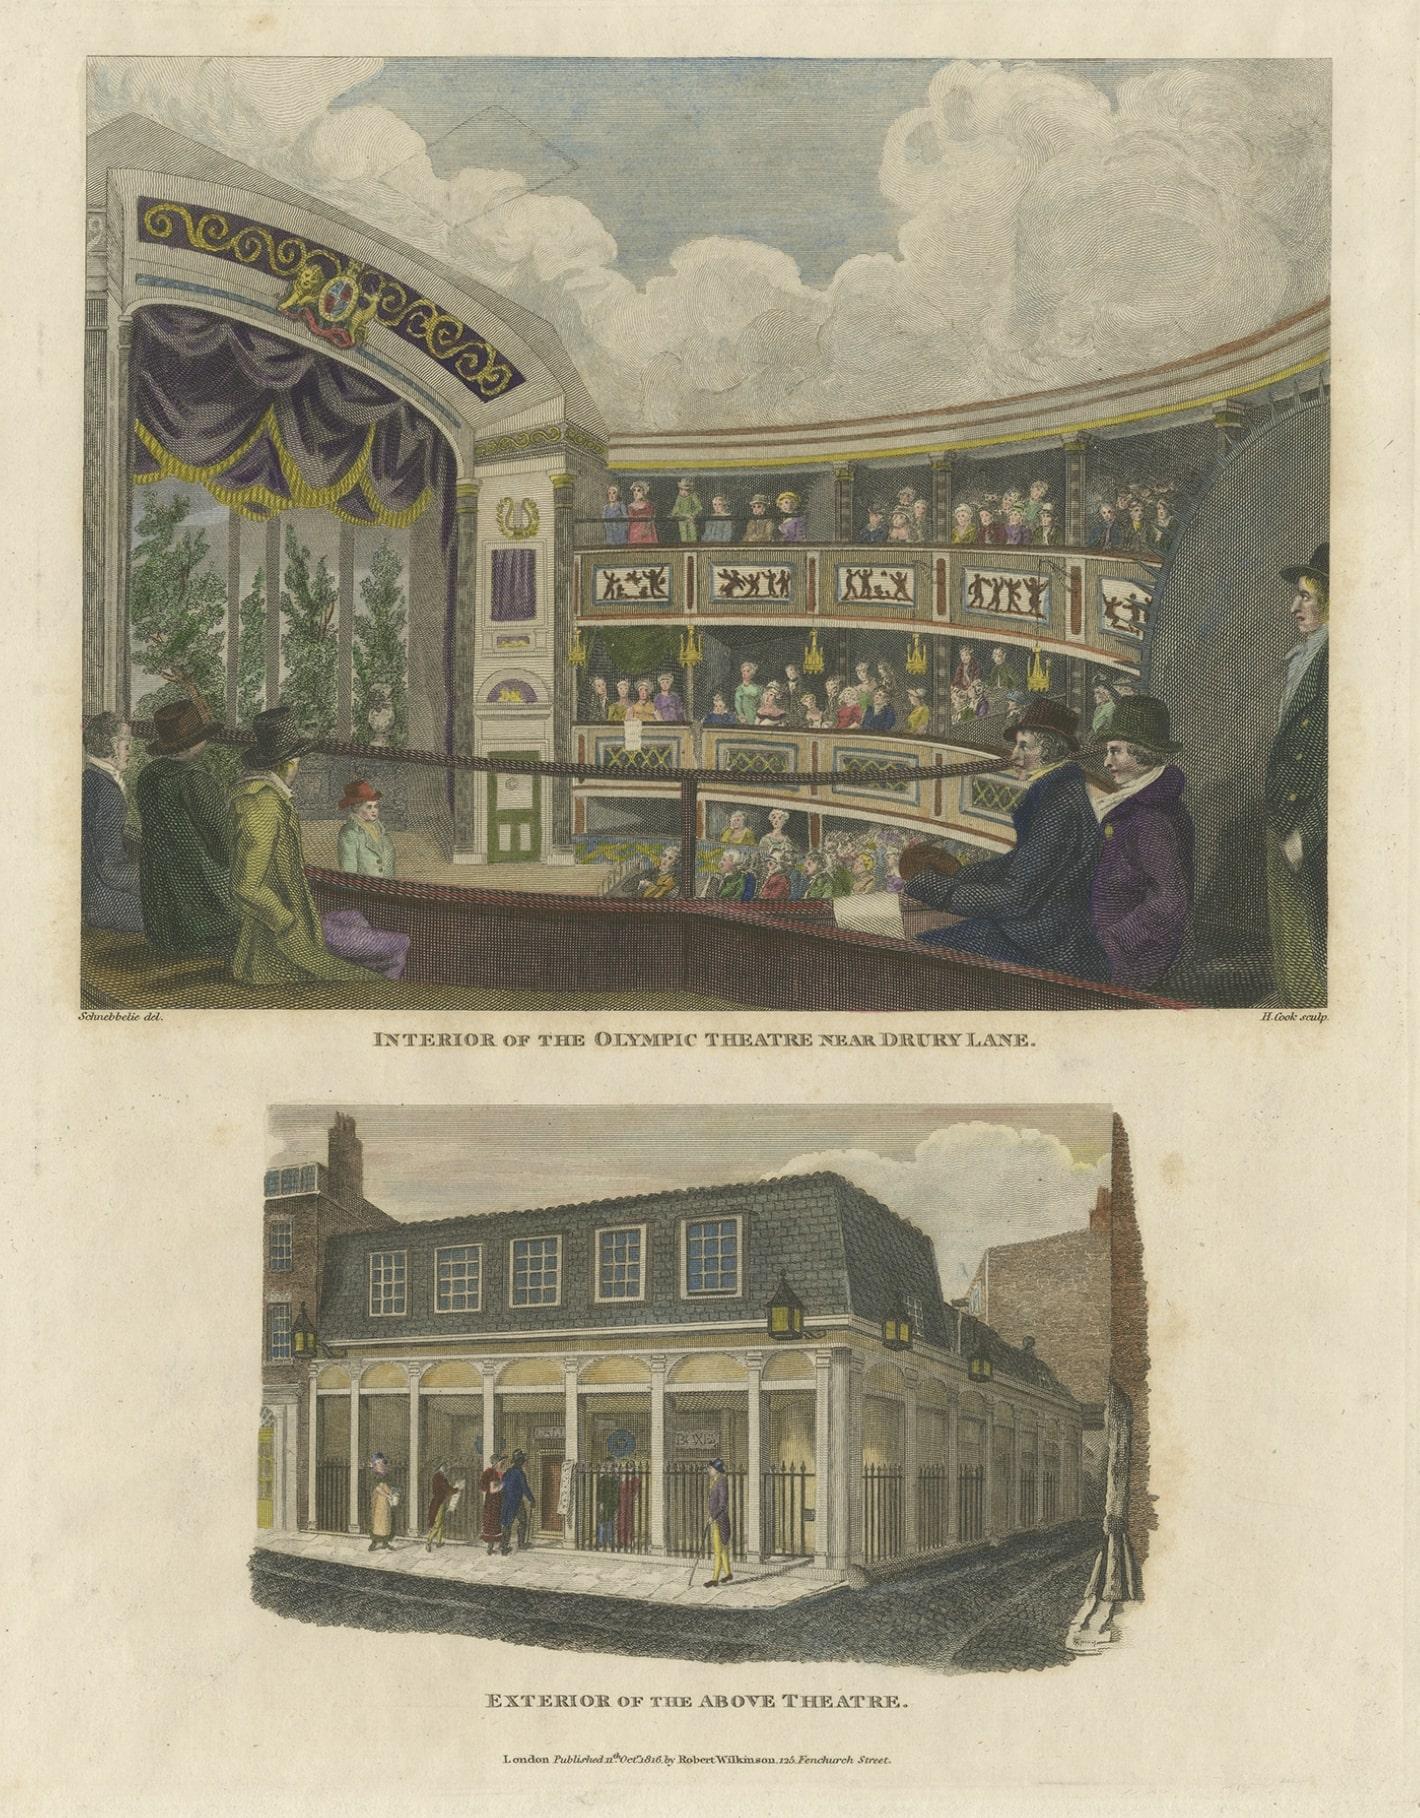 Antique print titled 'Interior of the Olympic Theatre near Drury Lane'. 

Arena and facade of the Olympic Theatre (now Aldwych). The Olympic Theatre, sometimes known as the Royal Olympic Theatre, was a 19th century London theatre, opened in 1806